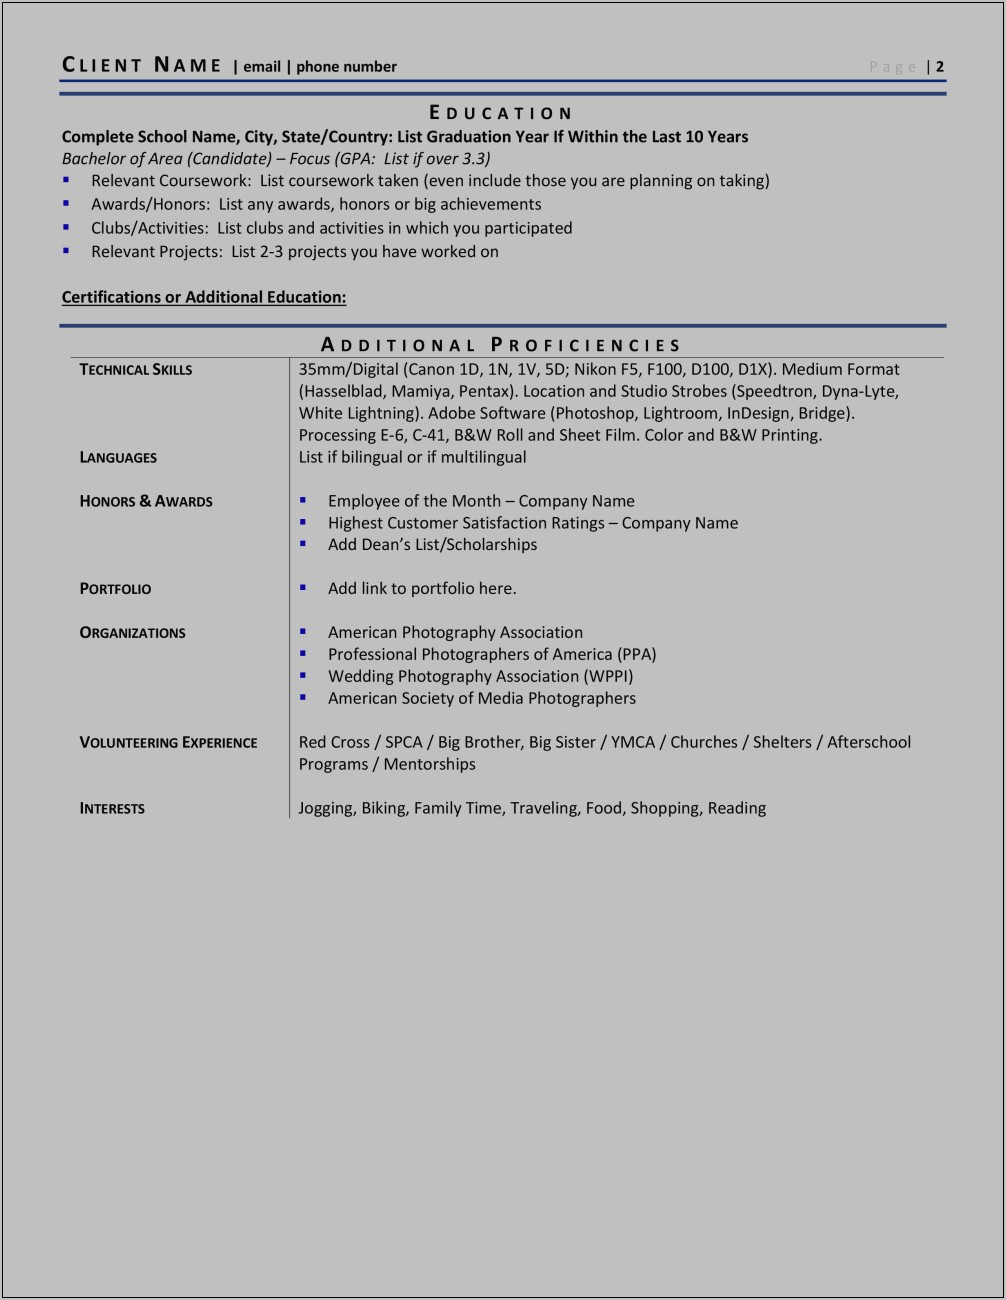 Example Resume Of A Photographer